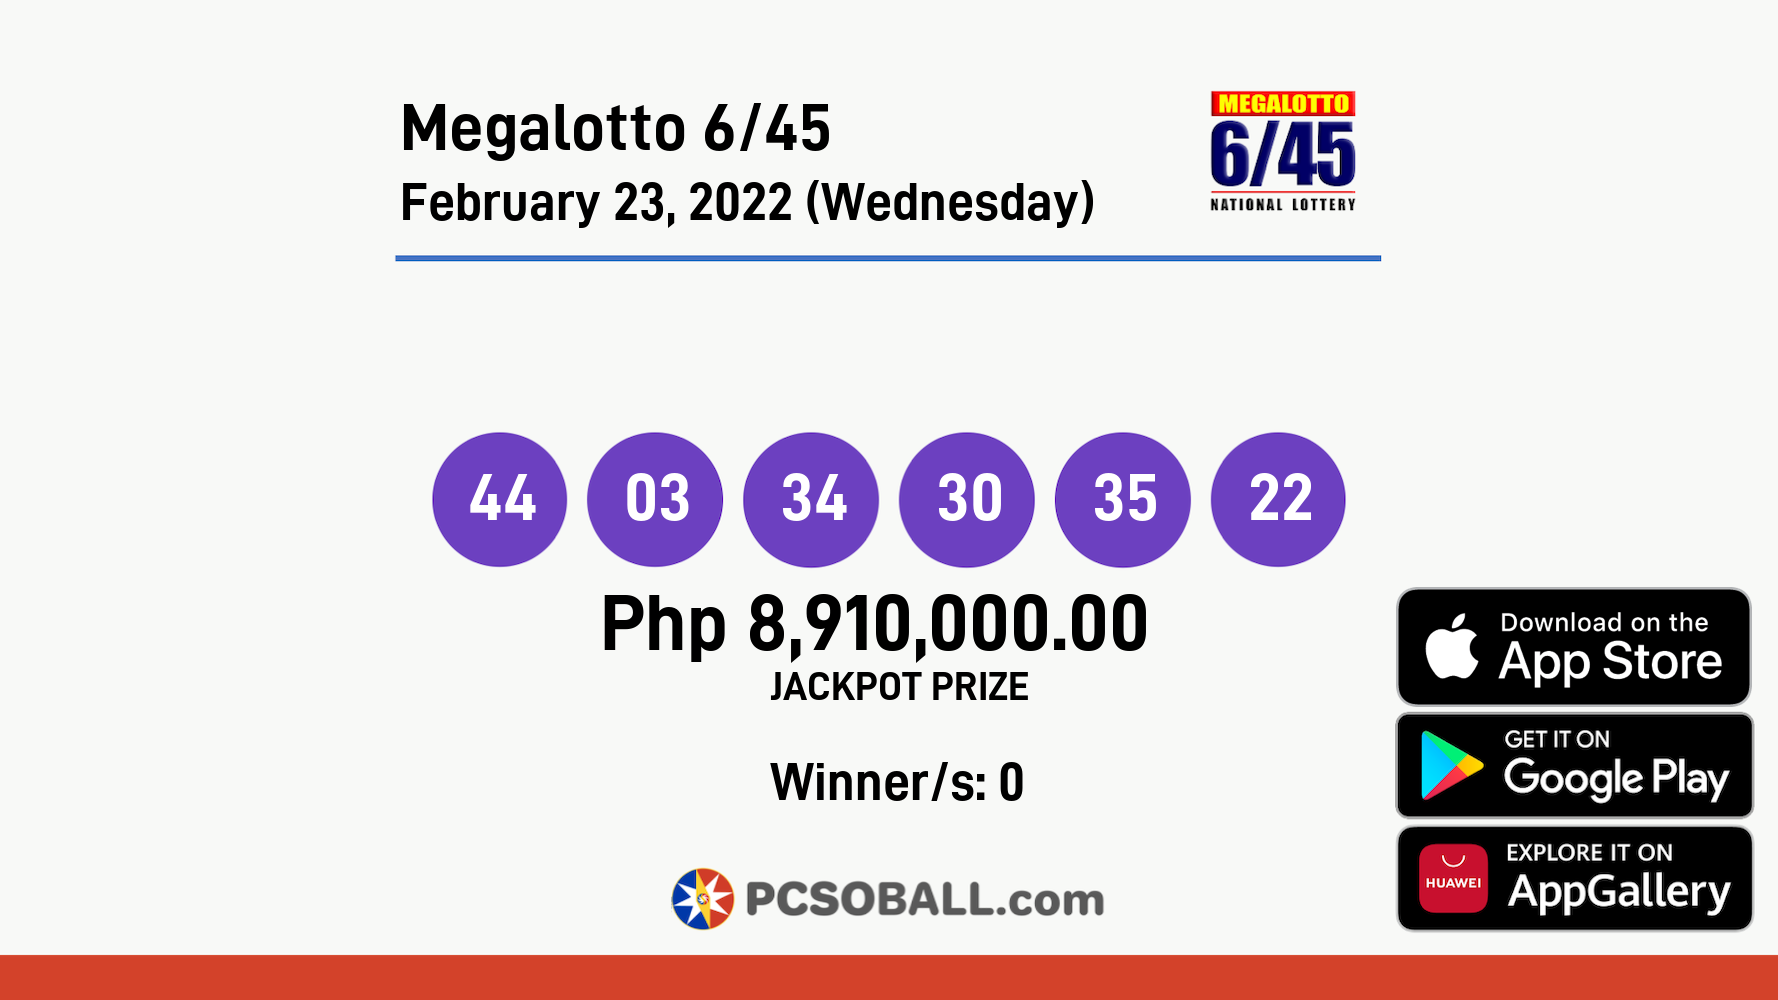 Megalotto 6/45 February 23, 2022 (Wednesday) Result